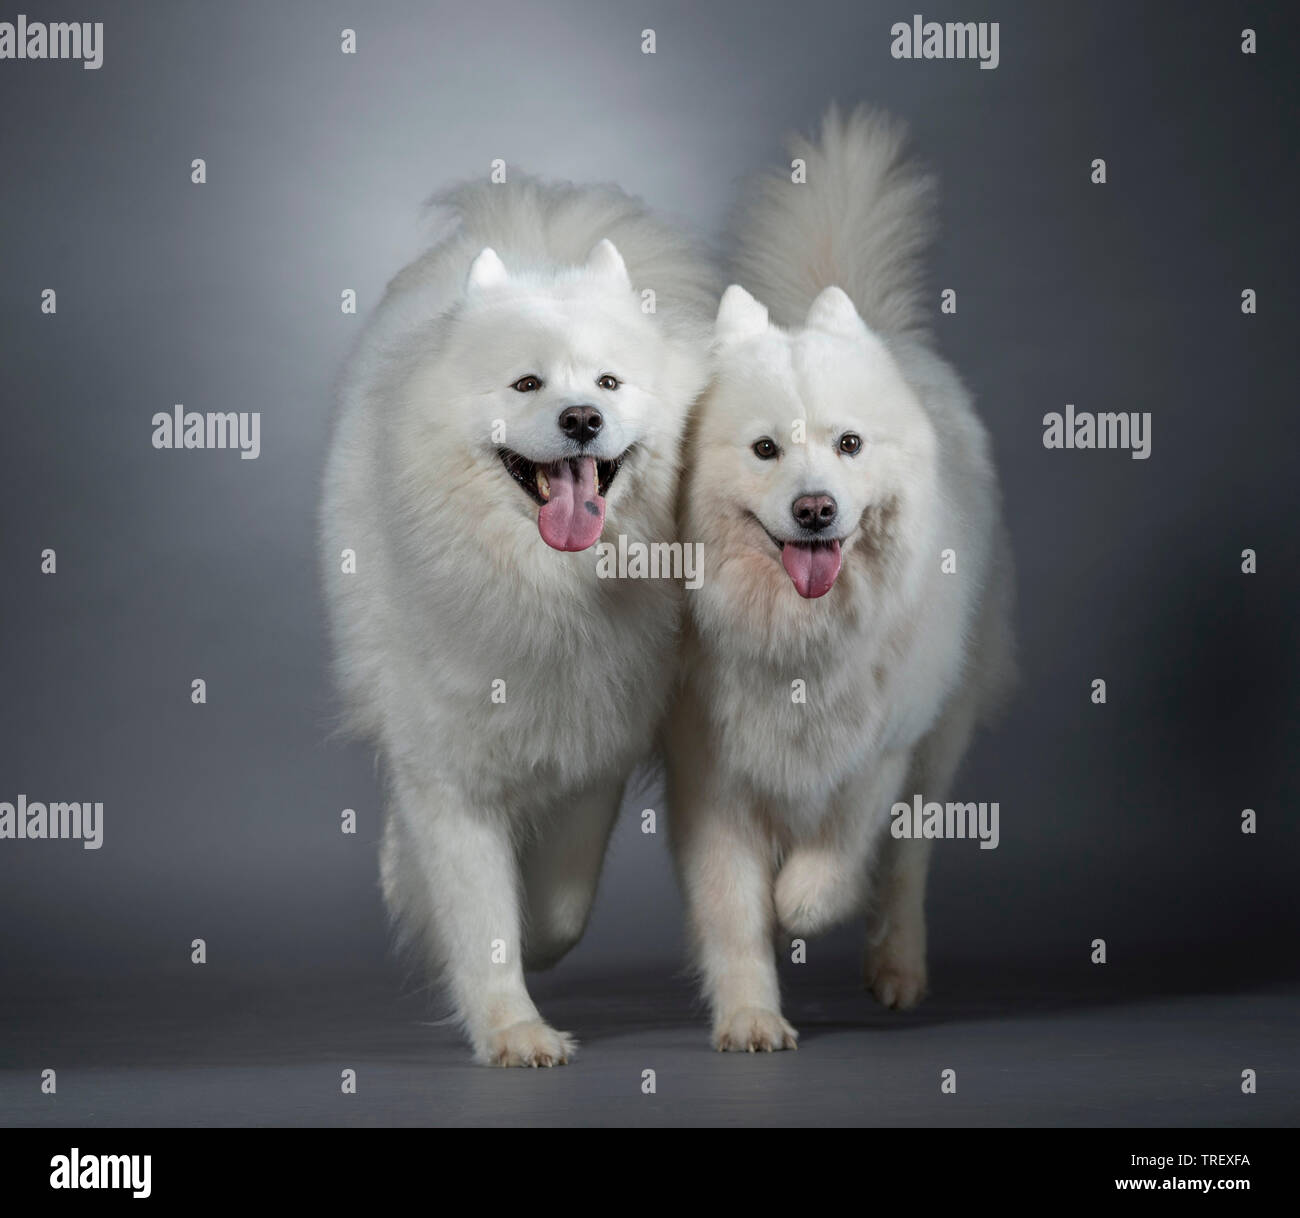 Samoyed. Two adult dogs walking towards the camera. Studio picture against a gray background. Stock Photo